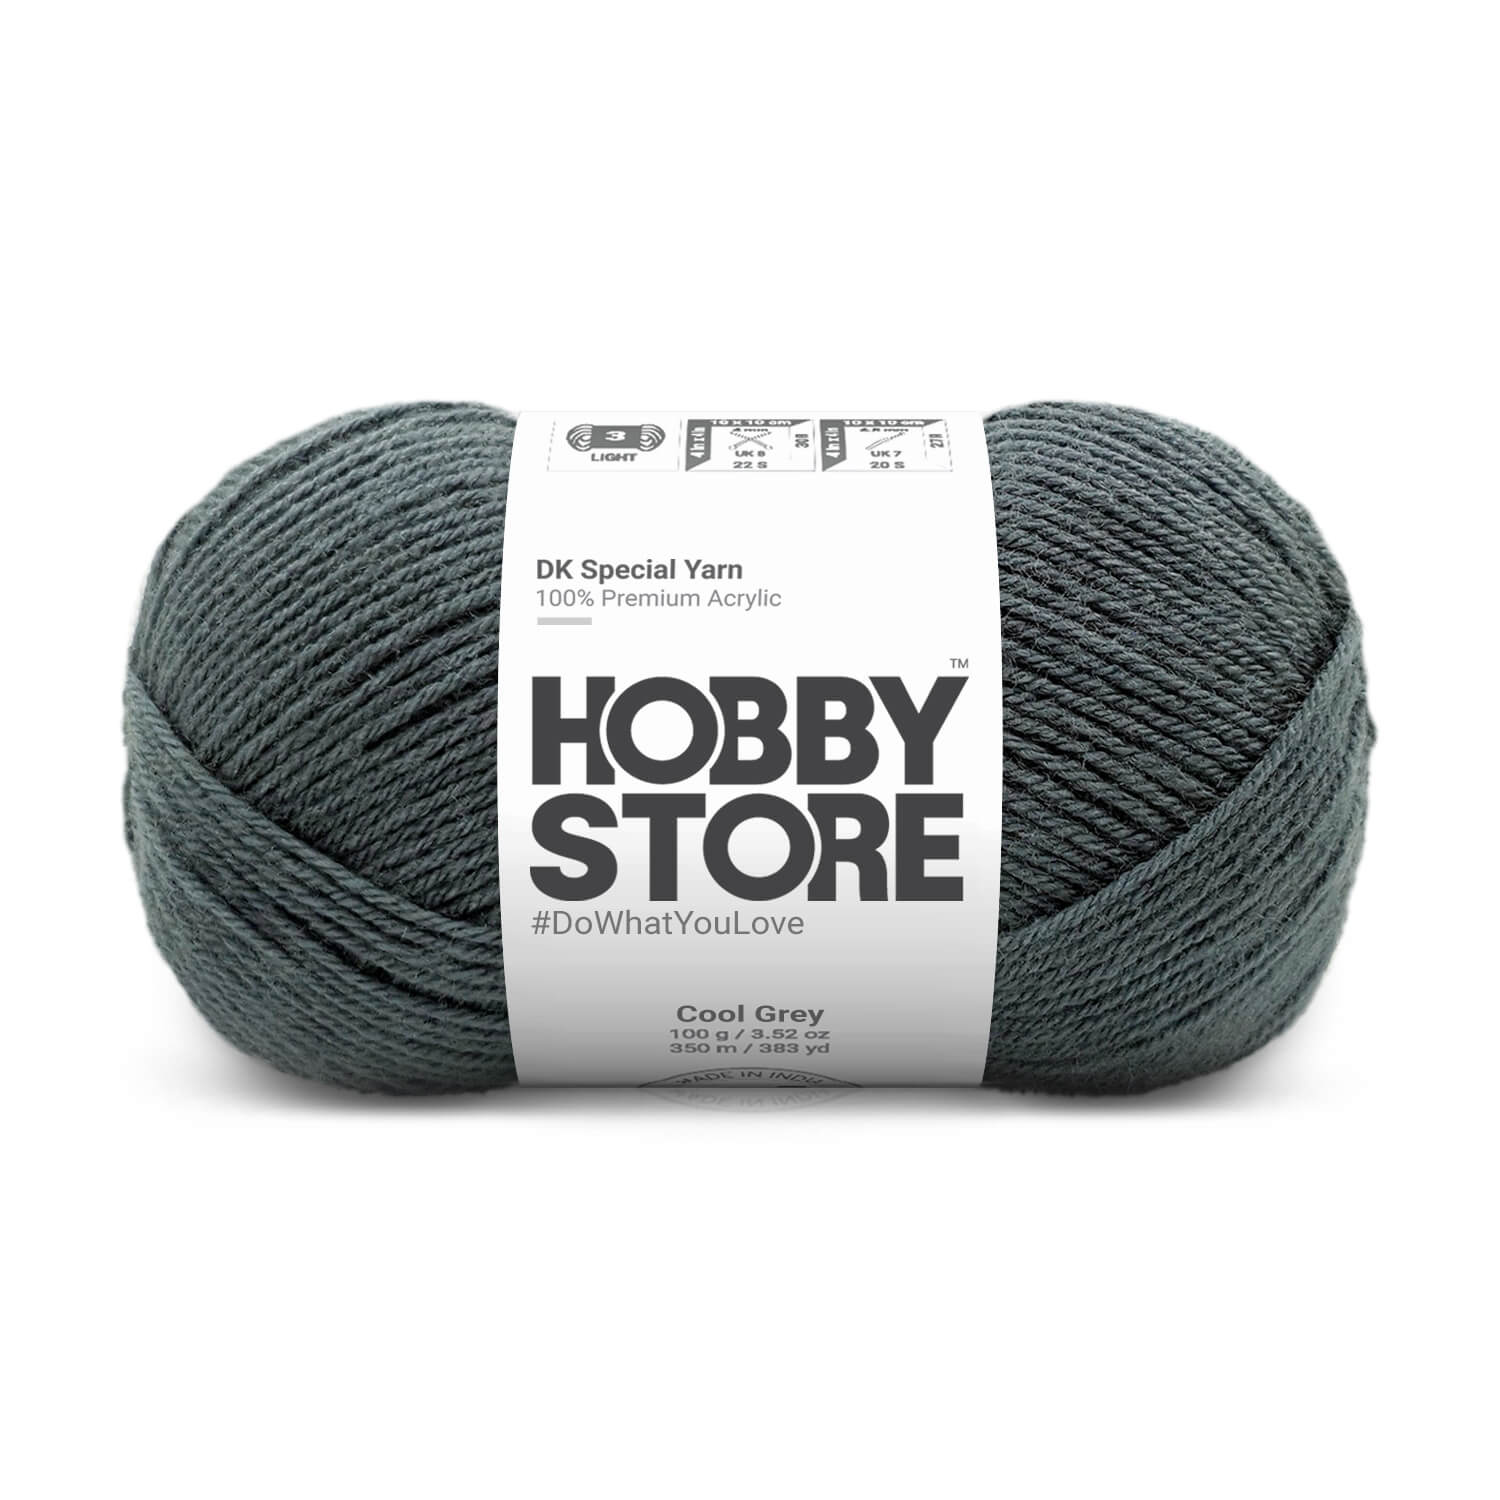 Hobby Store DK Special Yarn - Cool Grey 5005